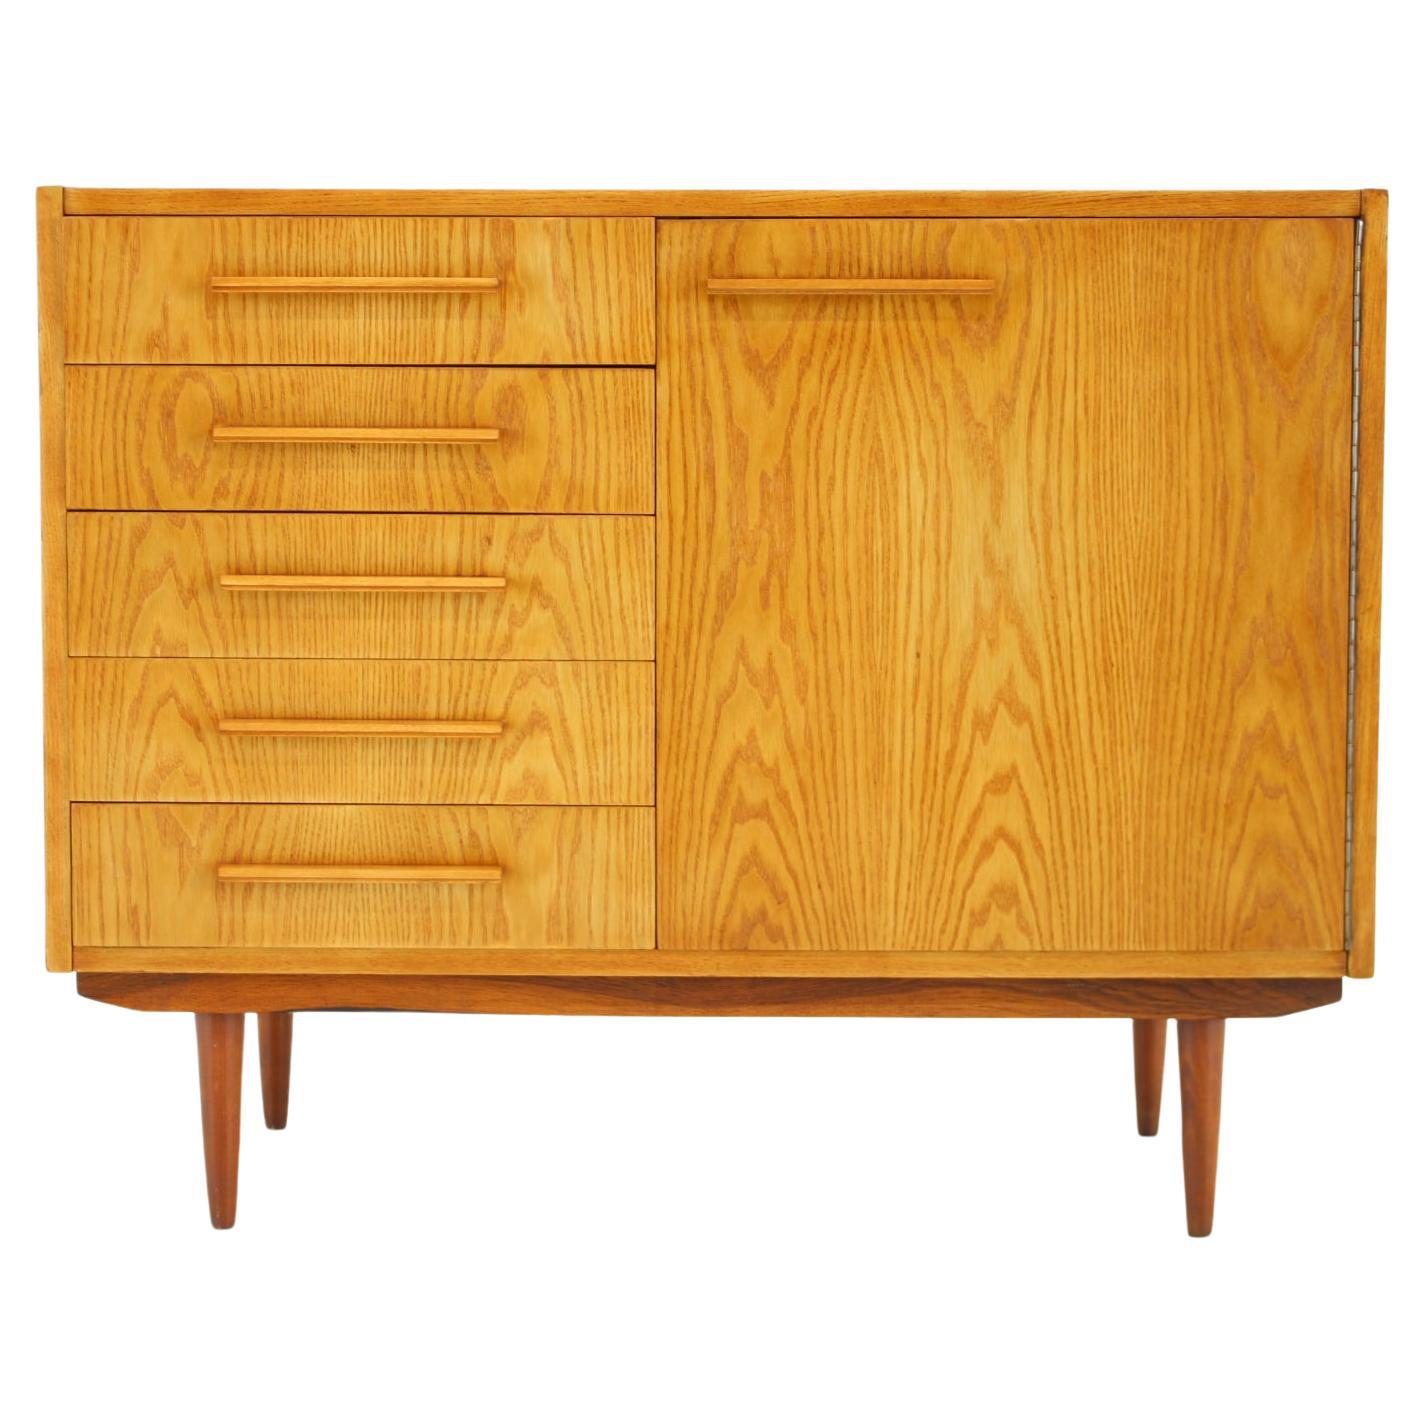 1970s Maple Cabinet or Chest Of Drawers, Czechoslovakia For Sale